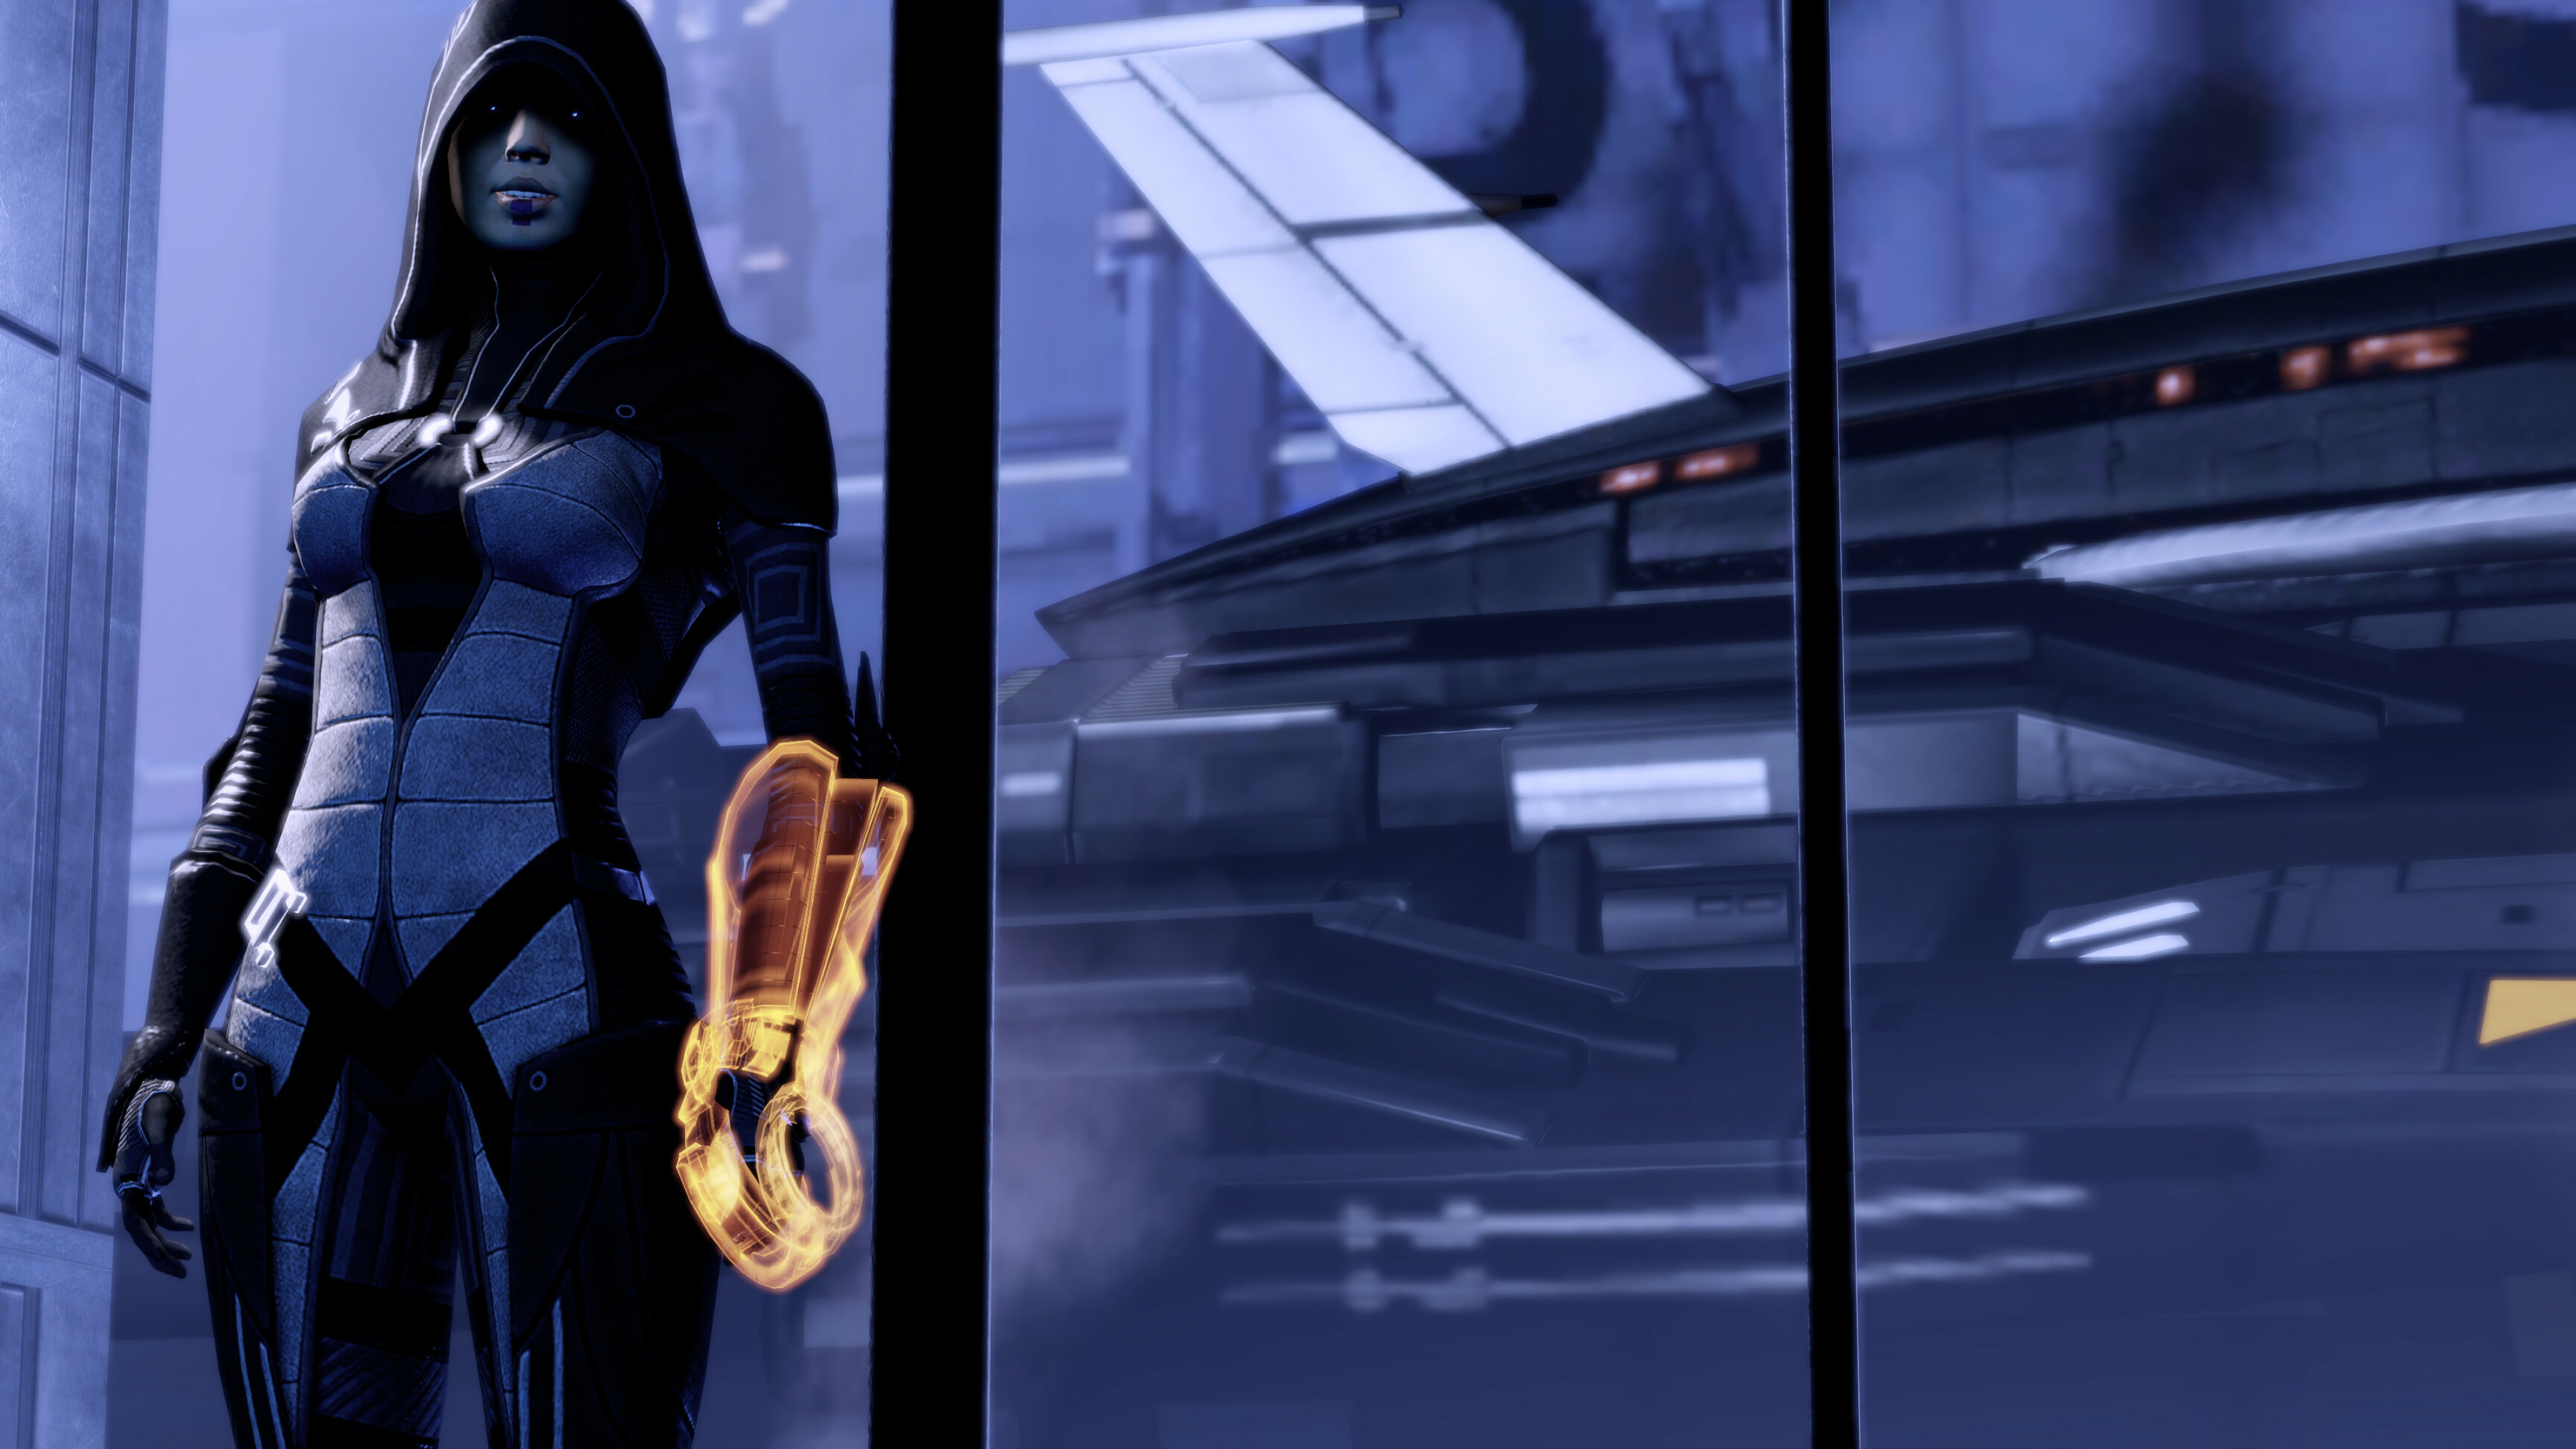 Mass Effect 2: An action role-playing video game developed by BioWare, Video games. 3840x2160 4K Wallpaper.